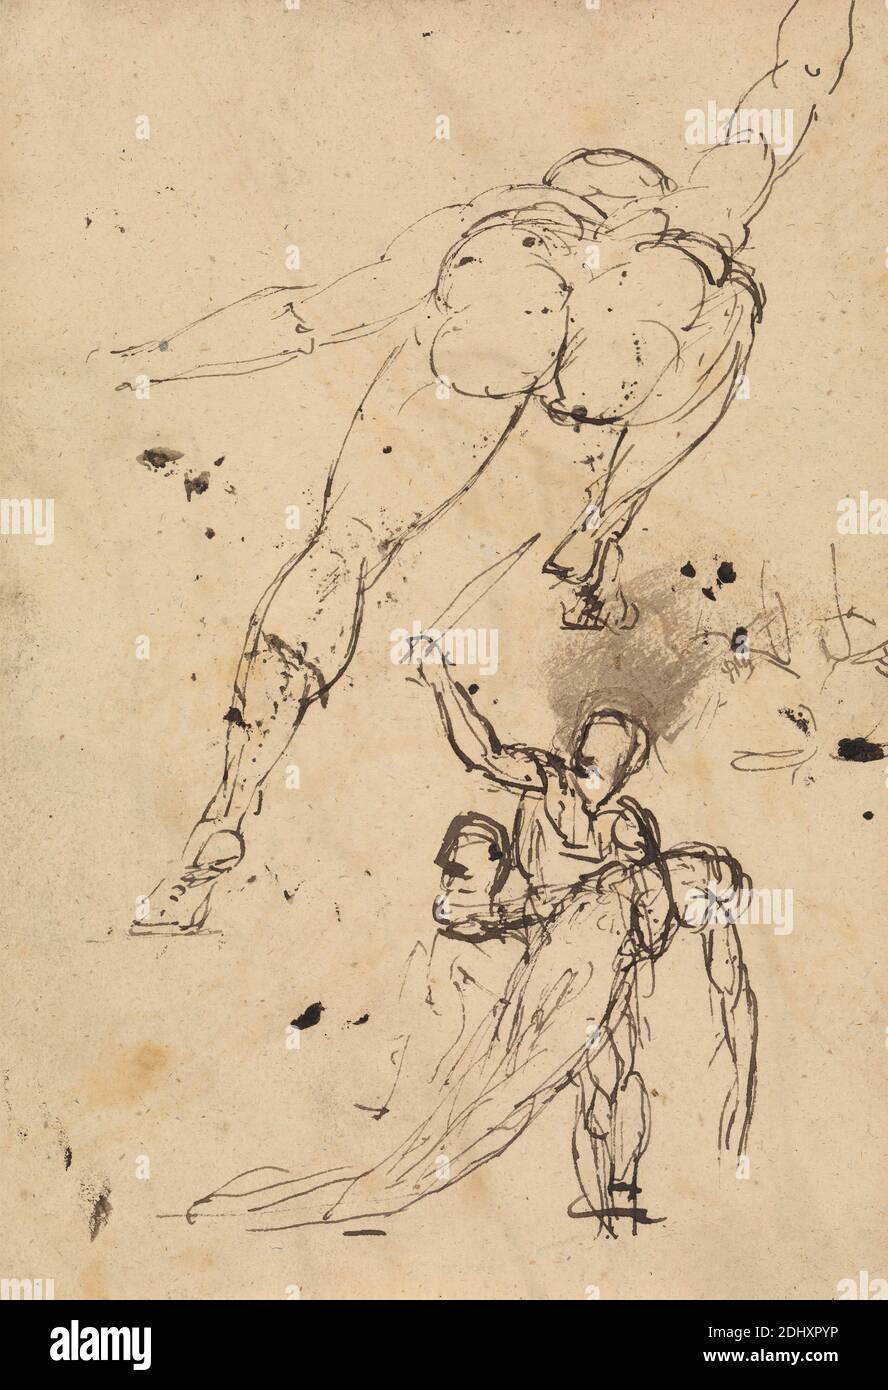 Study for Hercules and Persephone, Benjamin Robert Haydon, 1786–1846, British, undated, Pen and brown ink on moderately thick, slightly textured, beige, wove paper, Sheet: 6 7/8 × 4 11/16 inches (17.5 × 11.9 cm Stock Photo